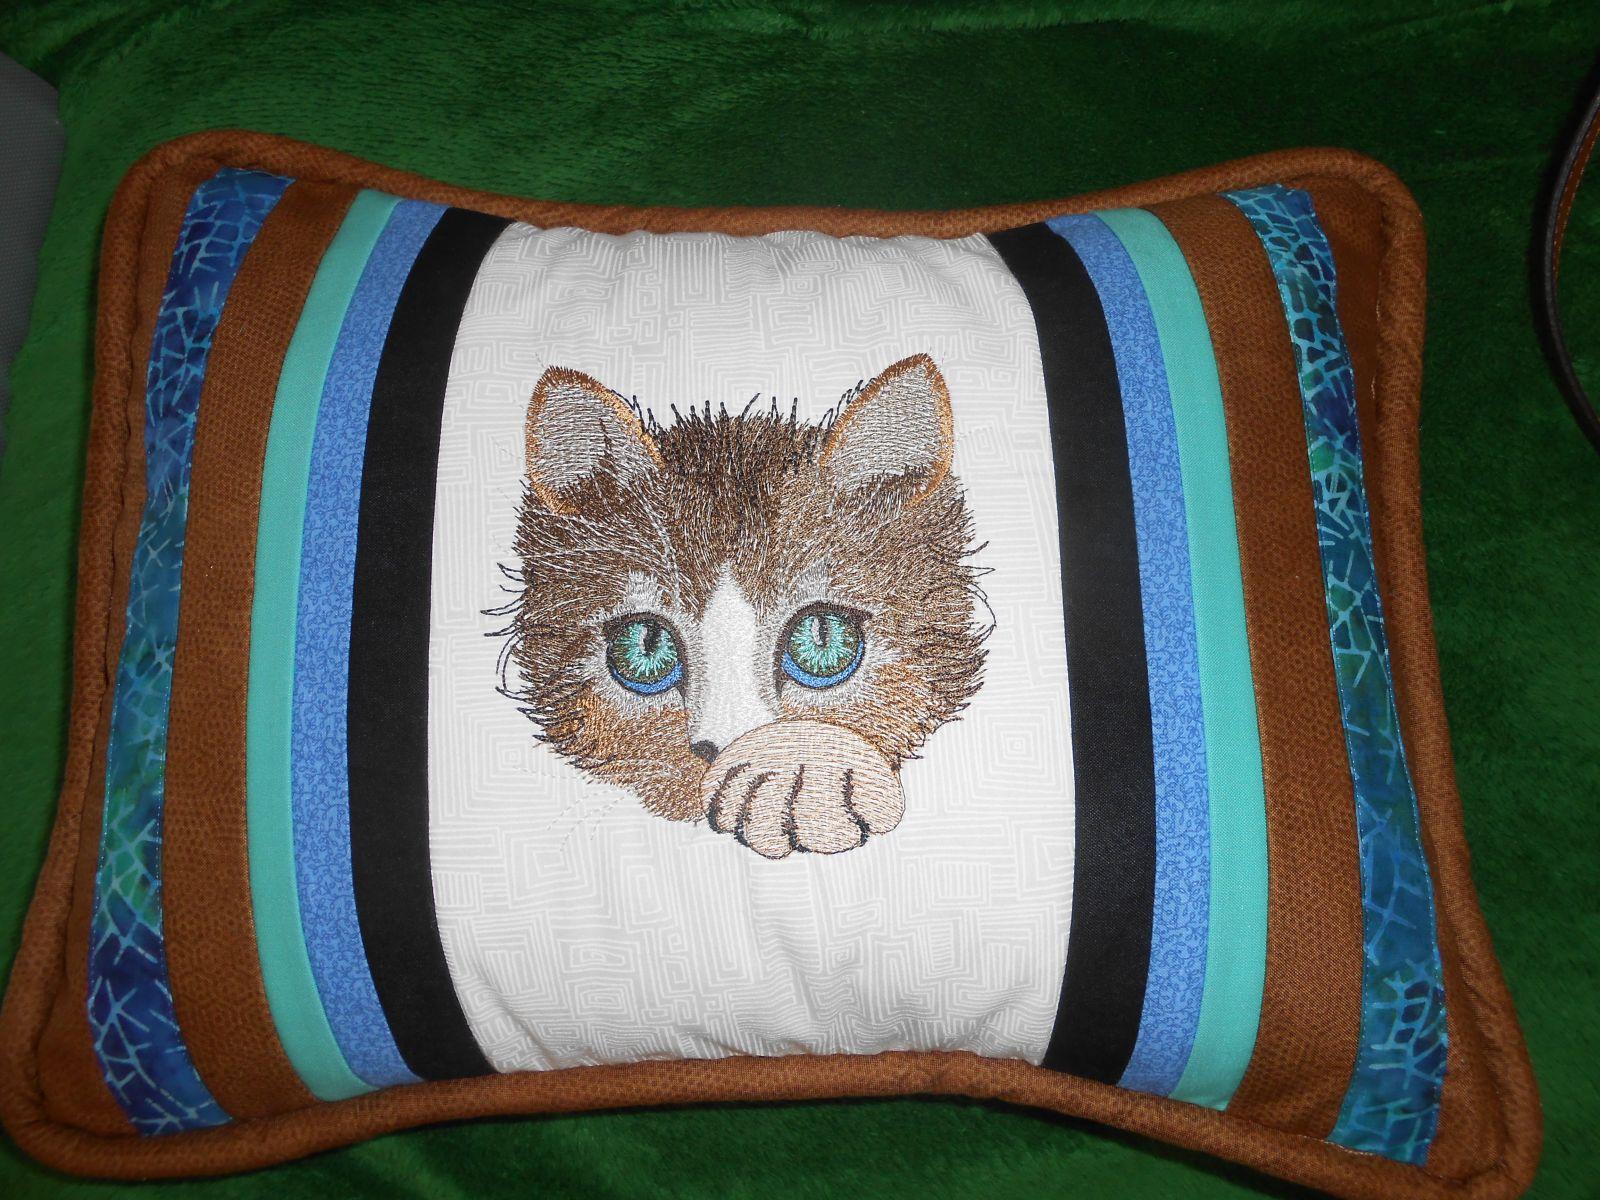 Pillow with cute kitten free embroidery design